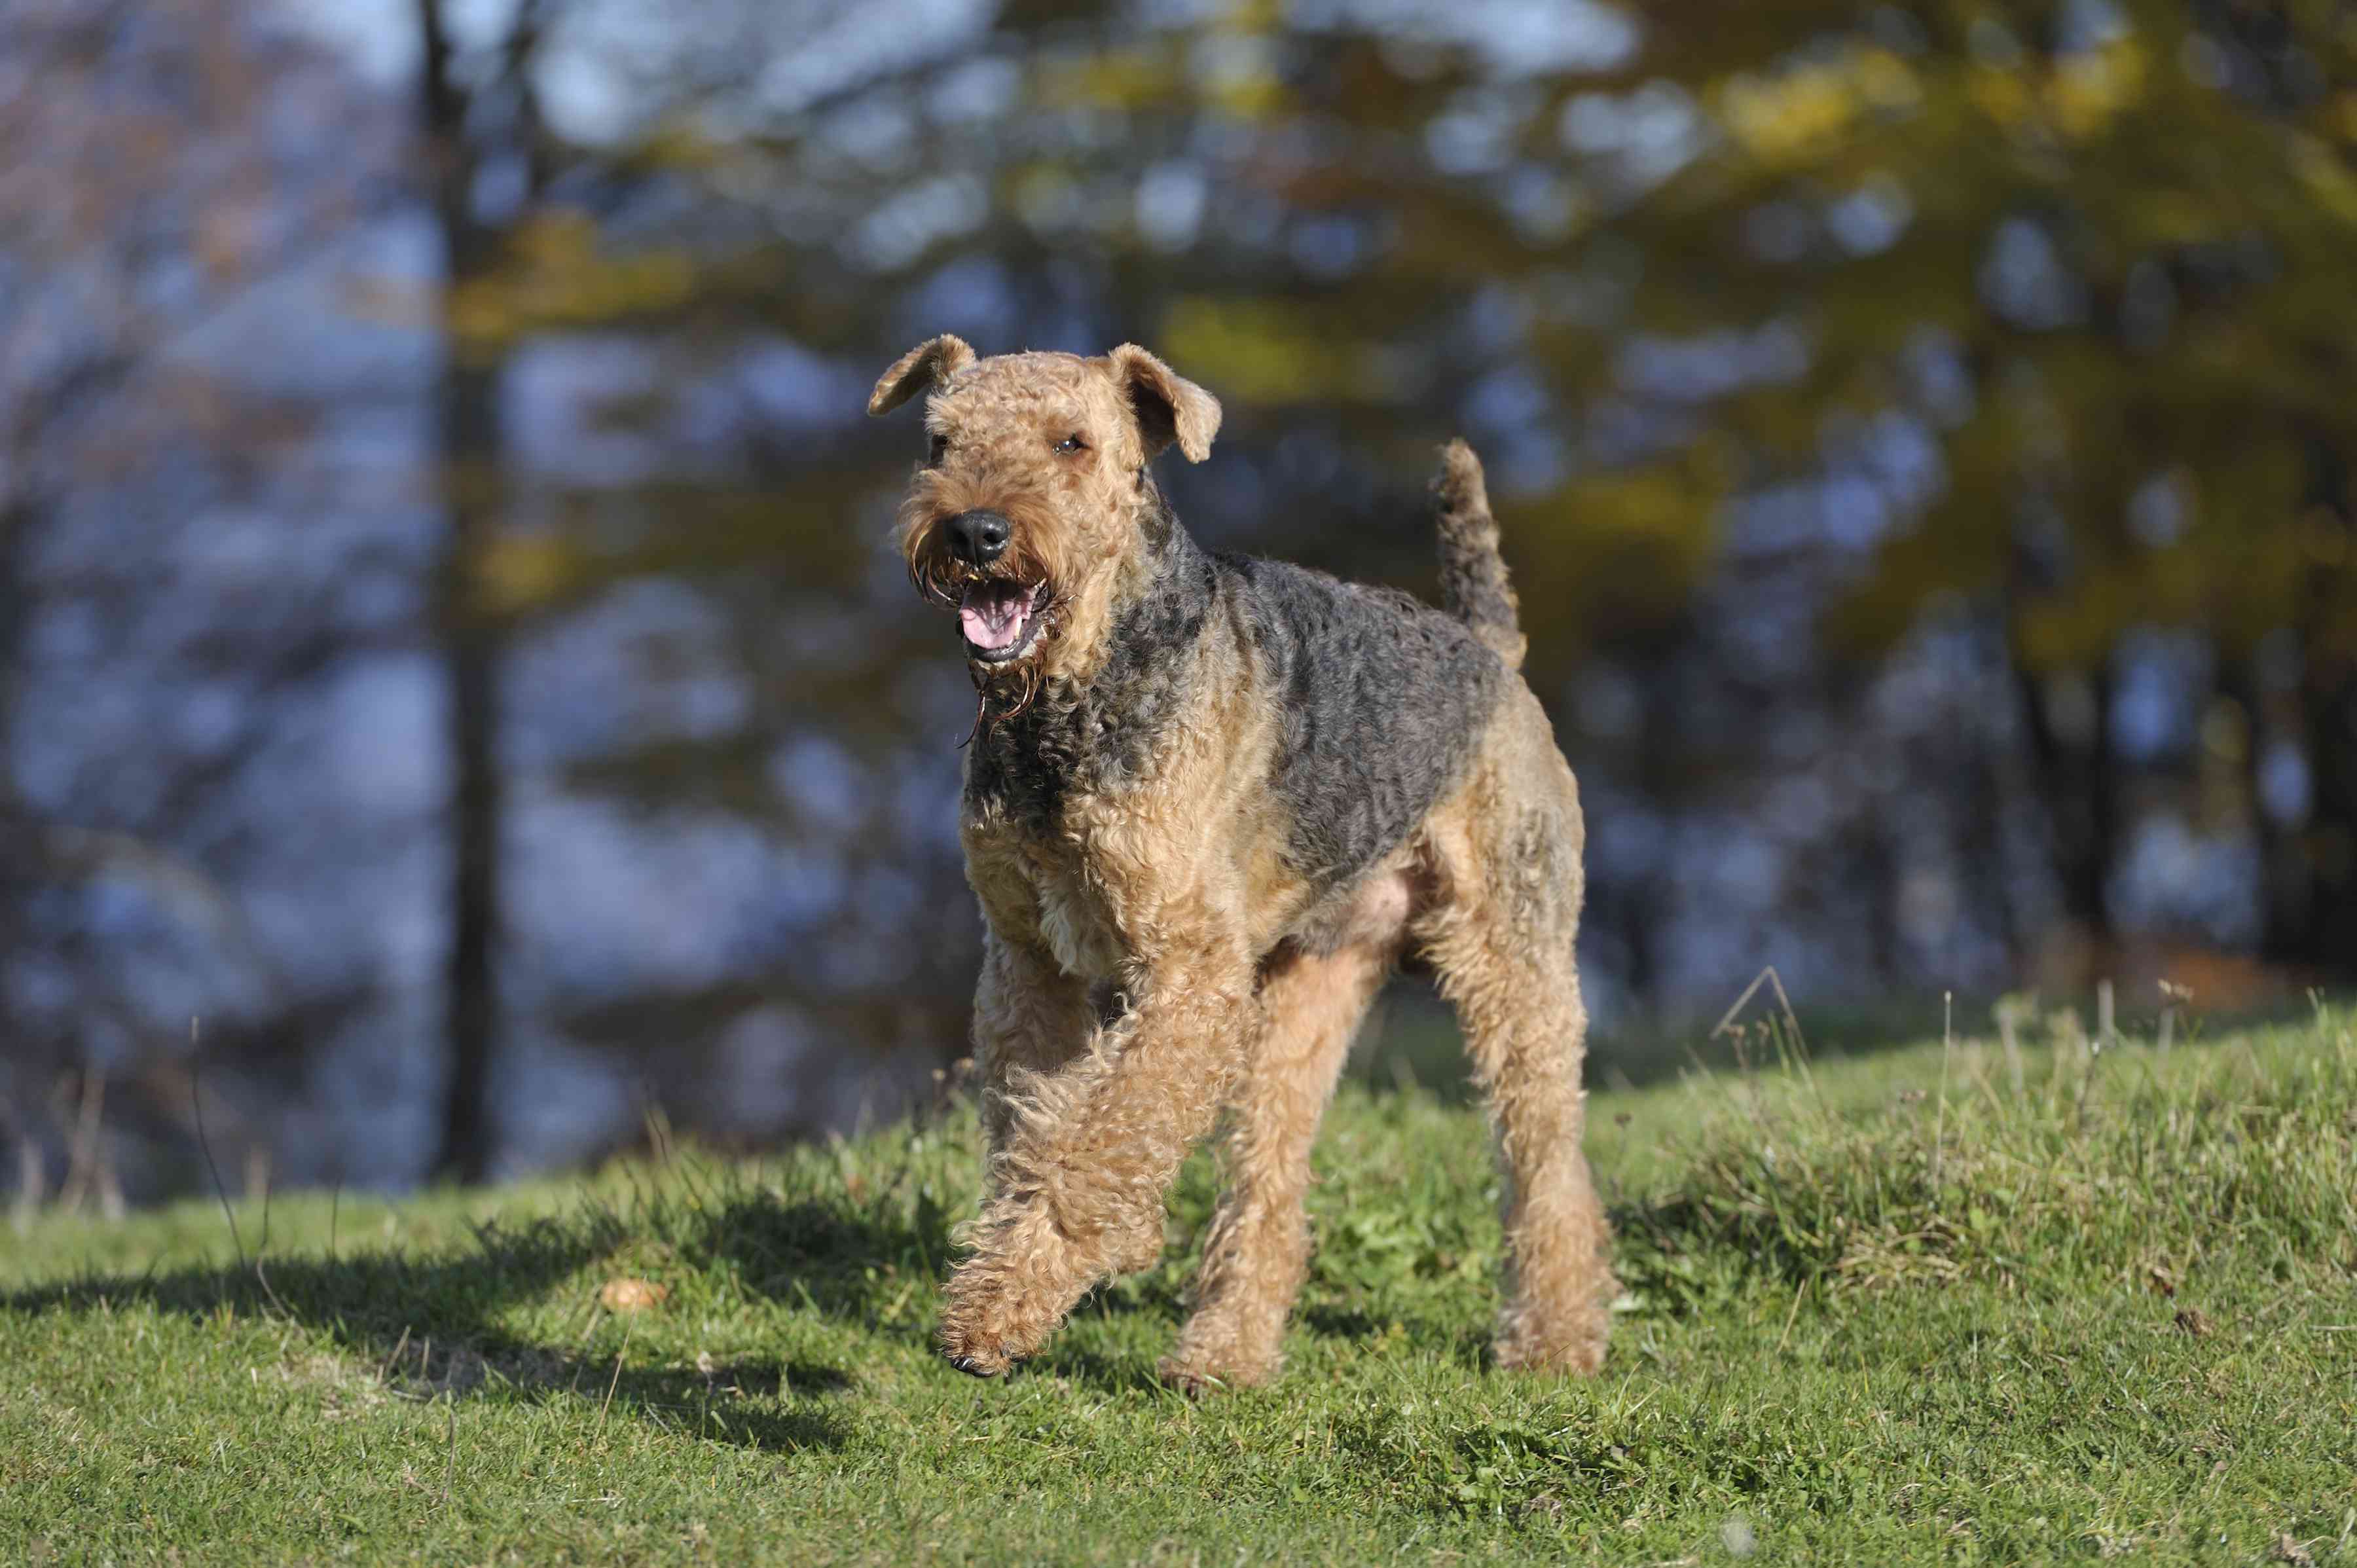 Airedale Terrier running across grass in front of trees